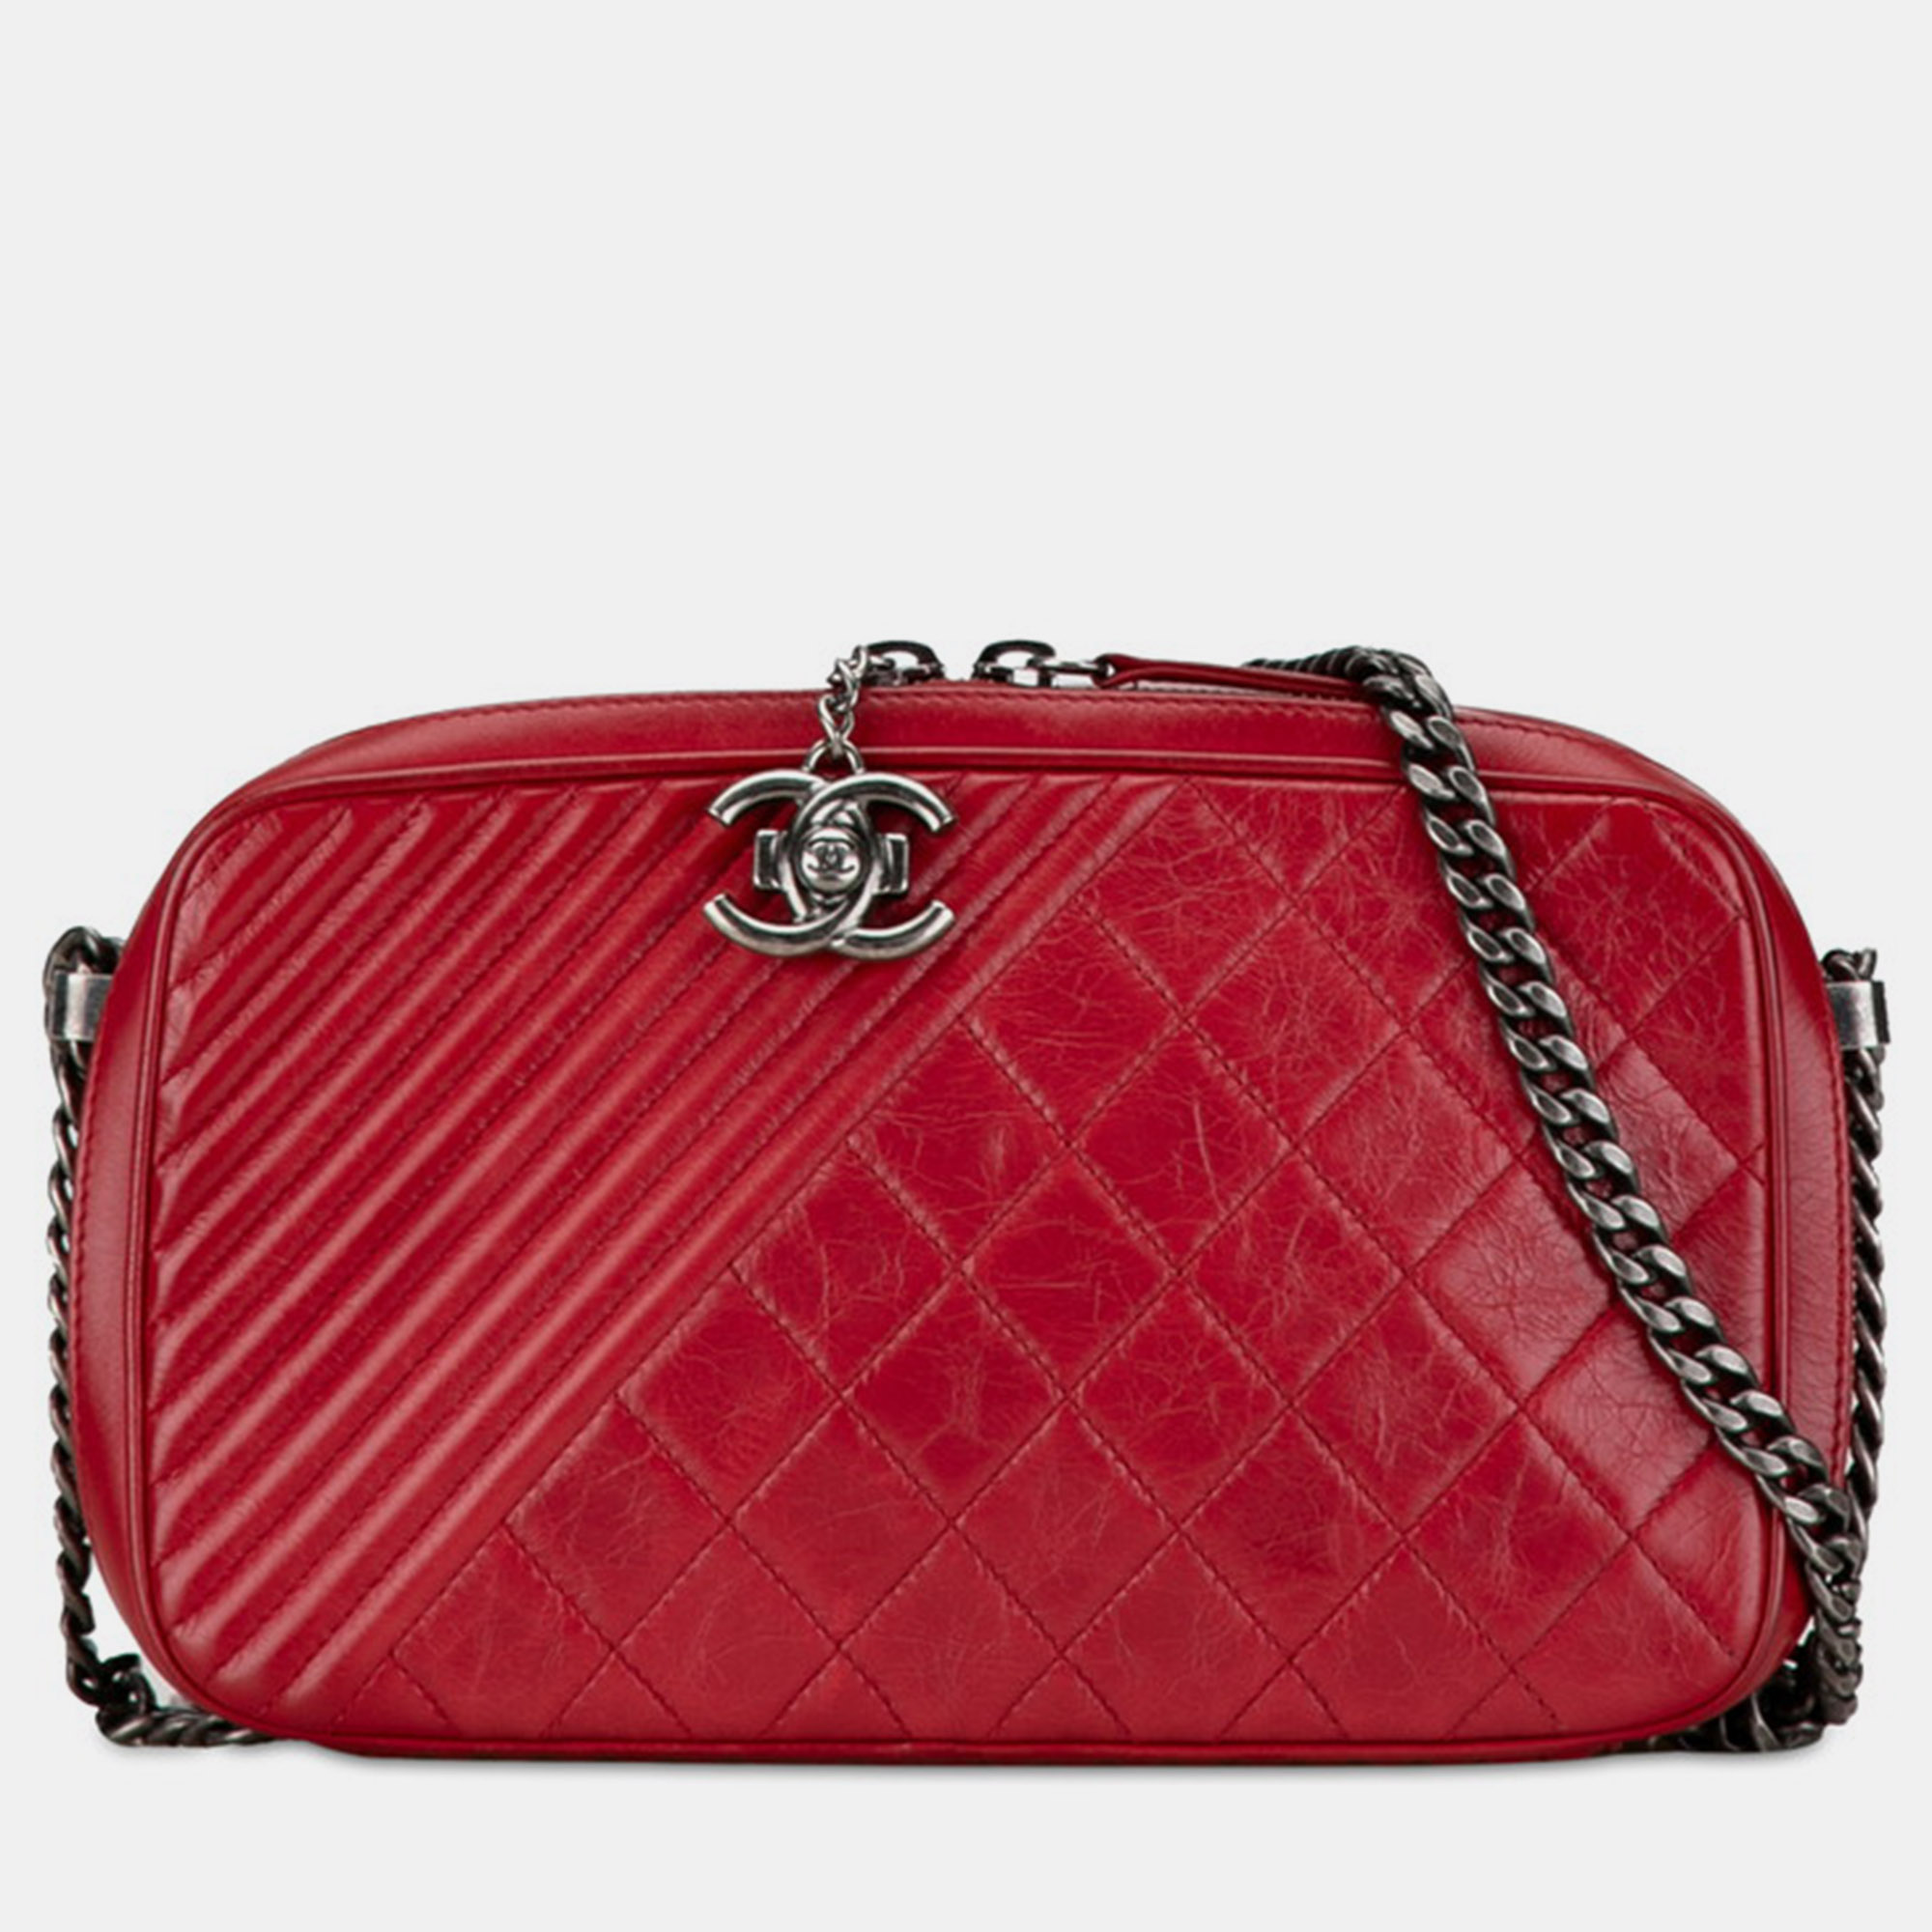 

Chanel Red Leather Coco Boy Camera Bag